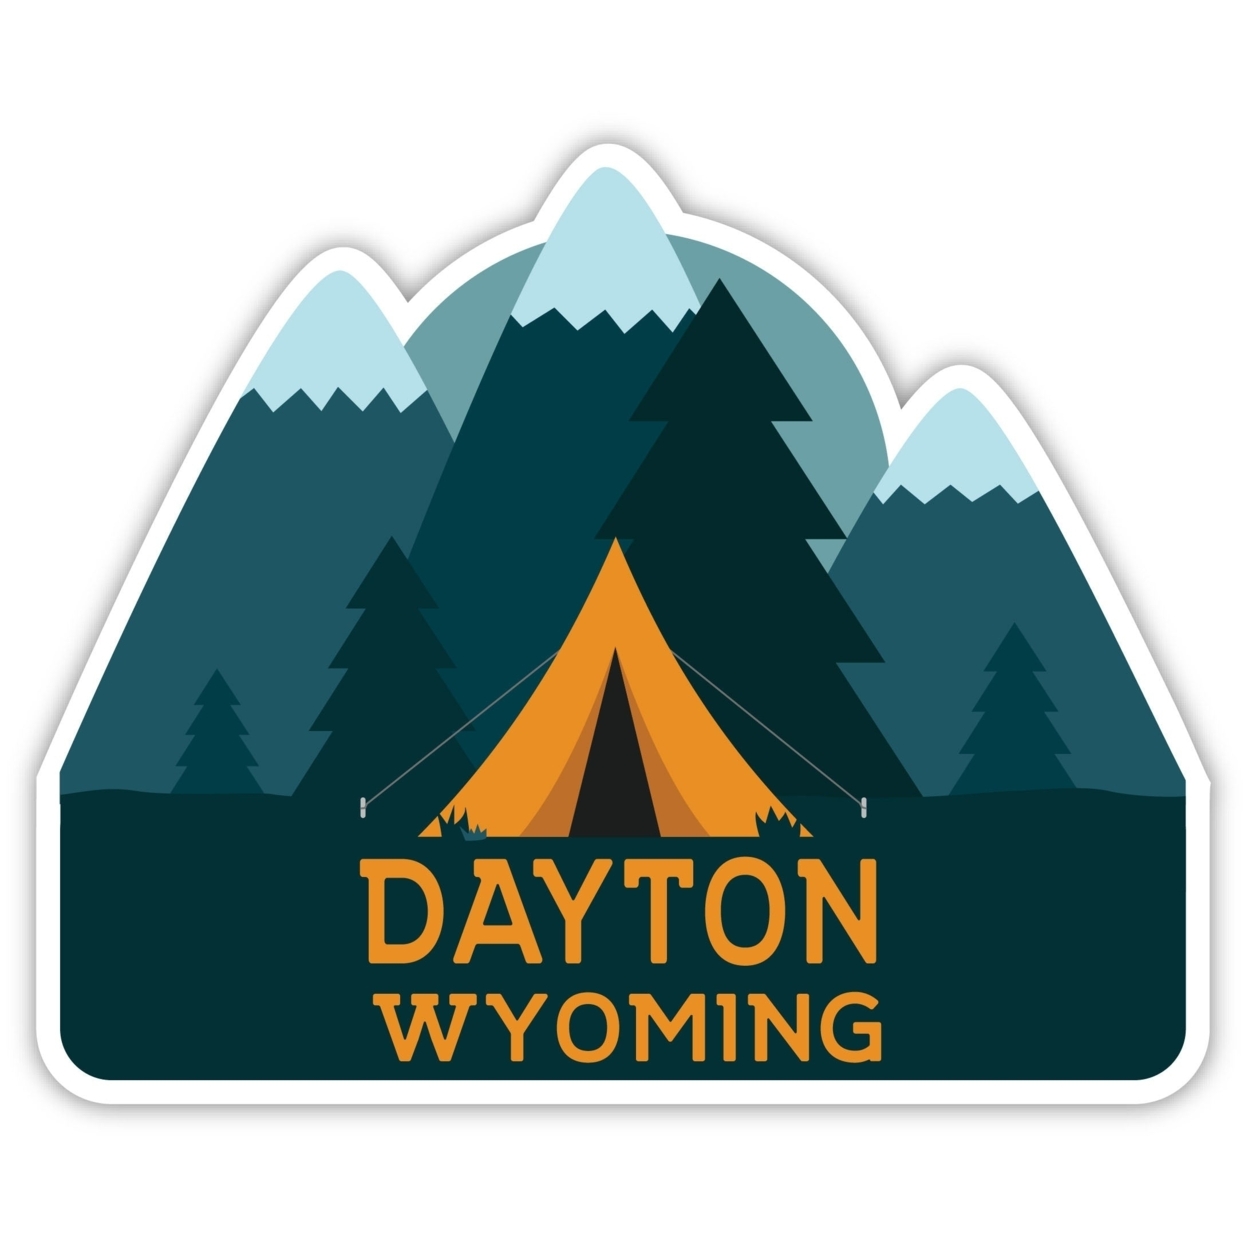 Dayton Wyoming Souvenir Decorative Stickers (Choose Theme And Size) - 4-Pack, 10-Inch, Tent